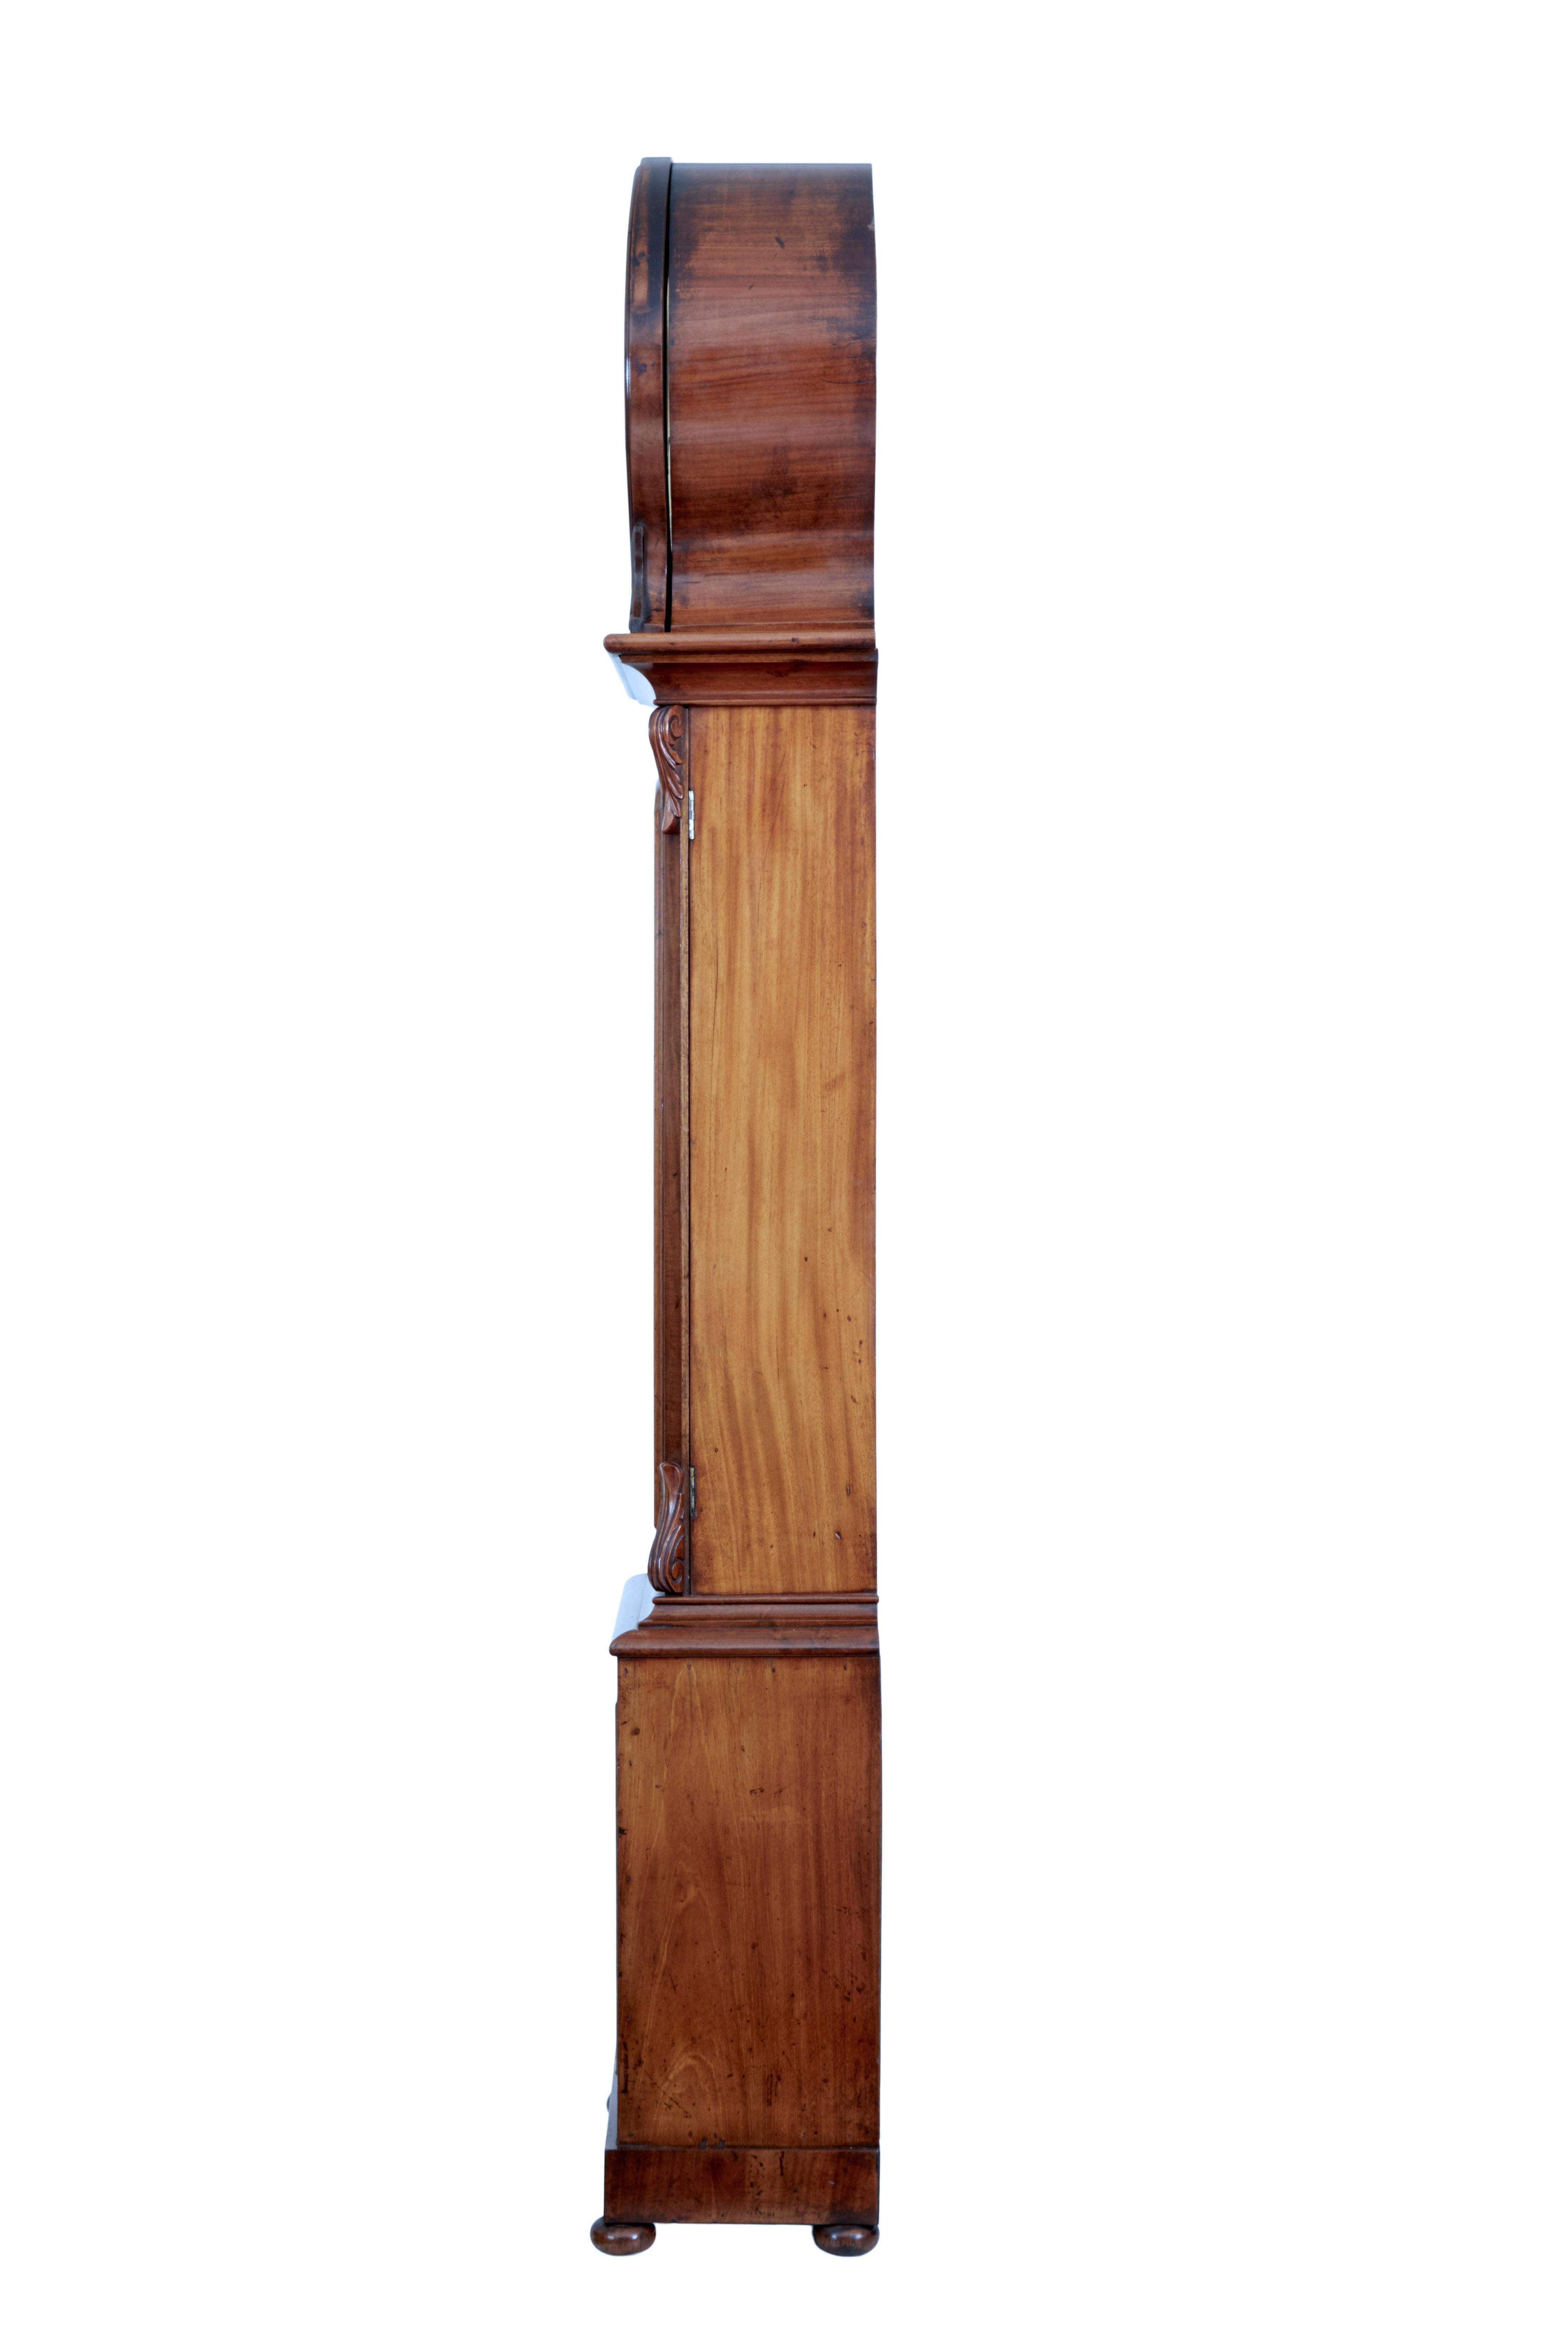 Victorian Scottish 19th Century Carved Mahogany Long Case Clock by Lumsden